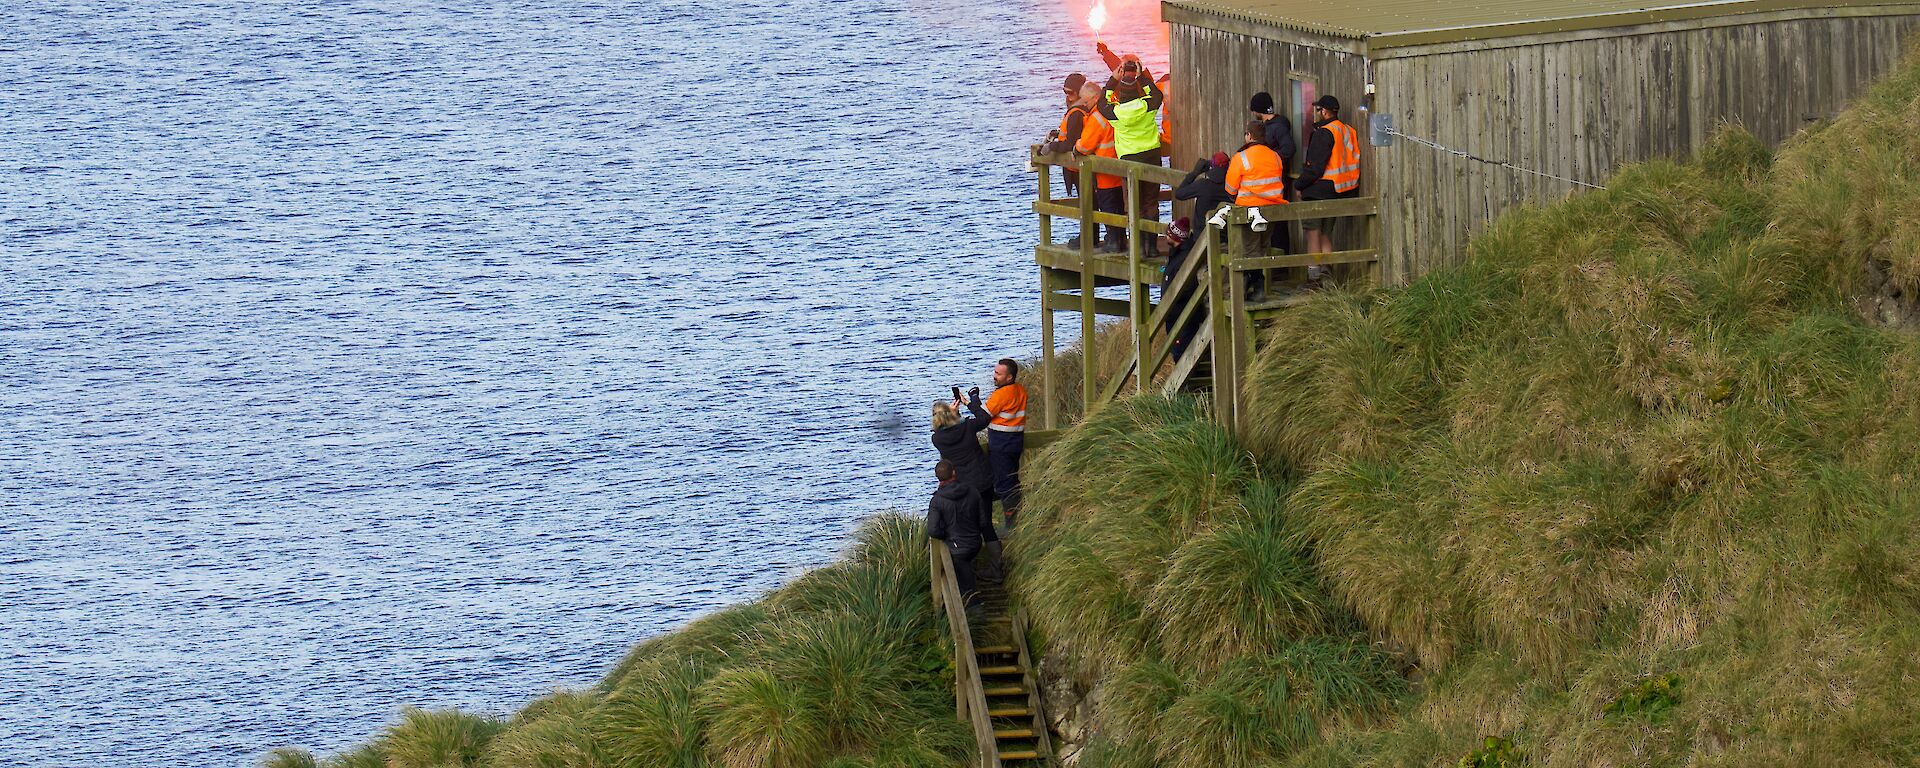 A group of people near a wooden hut by the ocean let off orange flares to farewell a ship